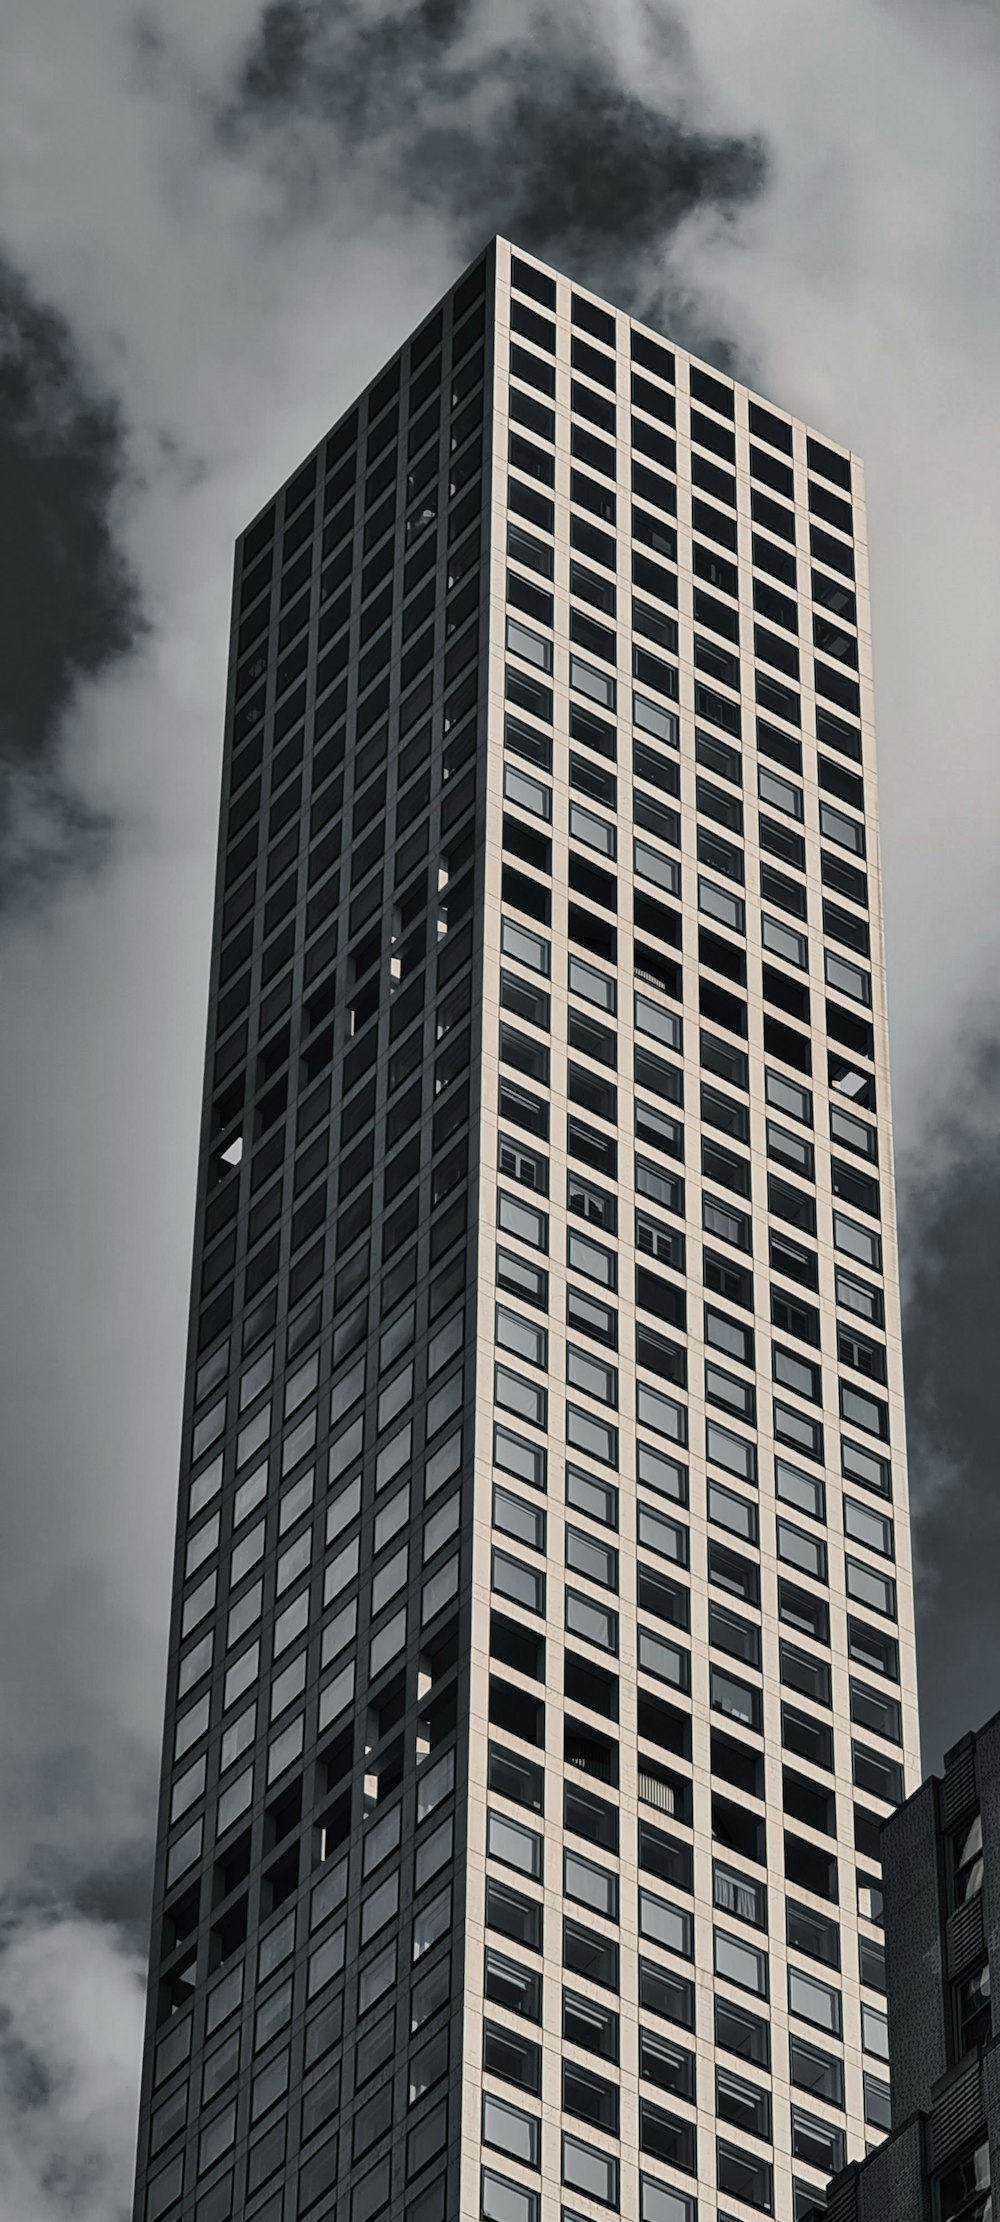 a very tall building with a very cloudy sky in the background